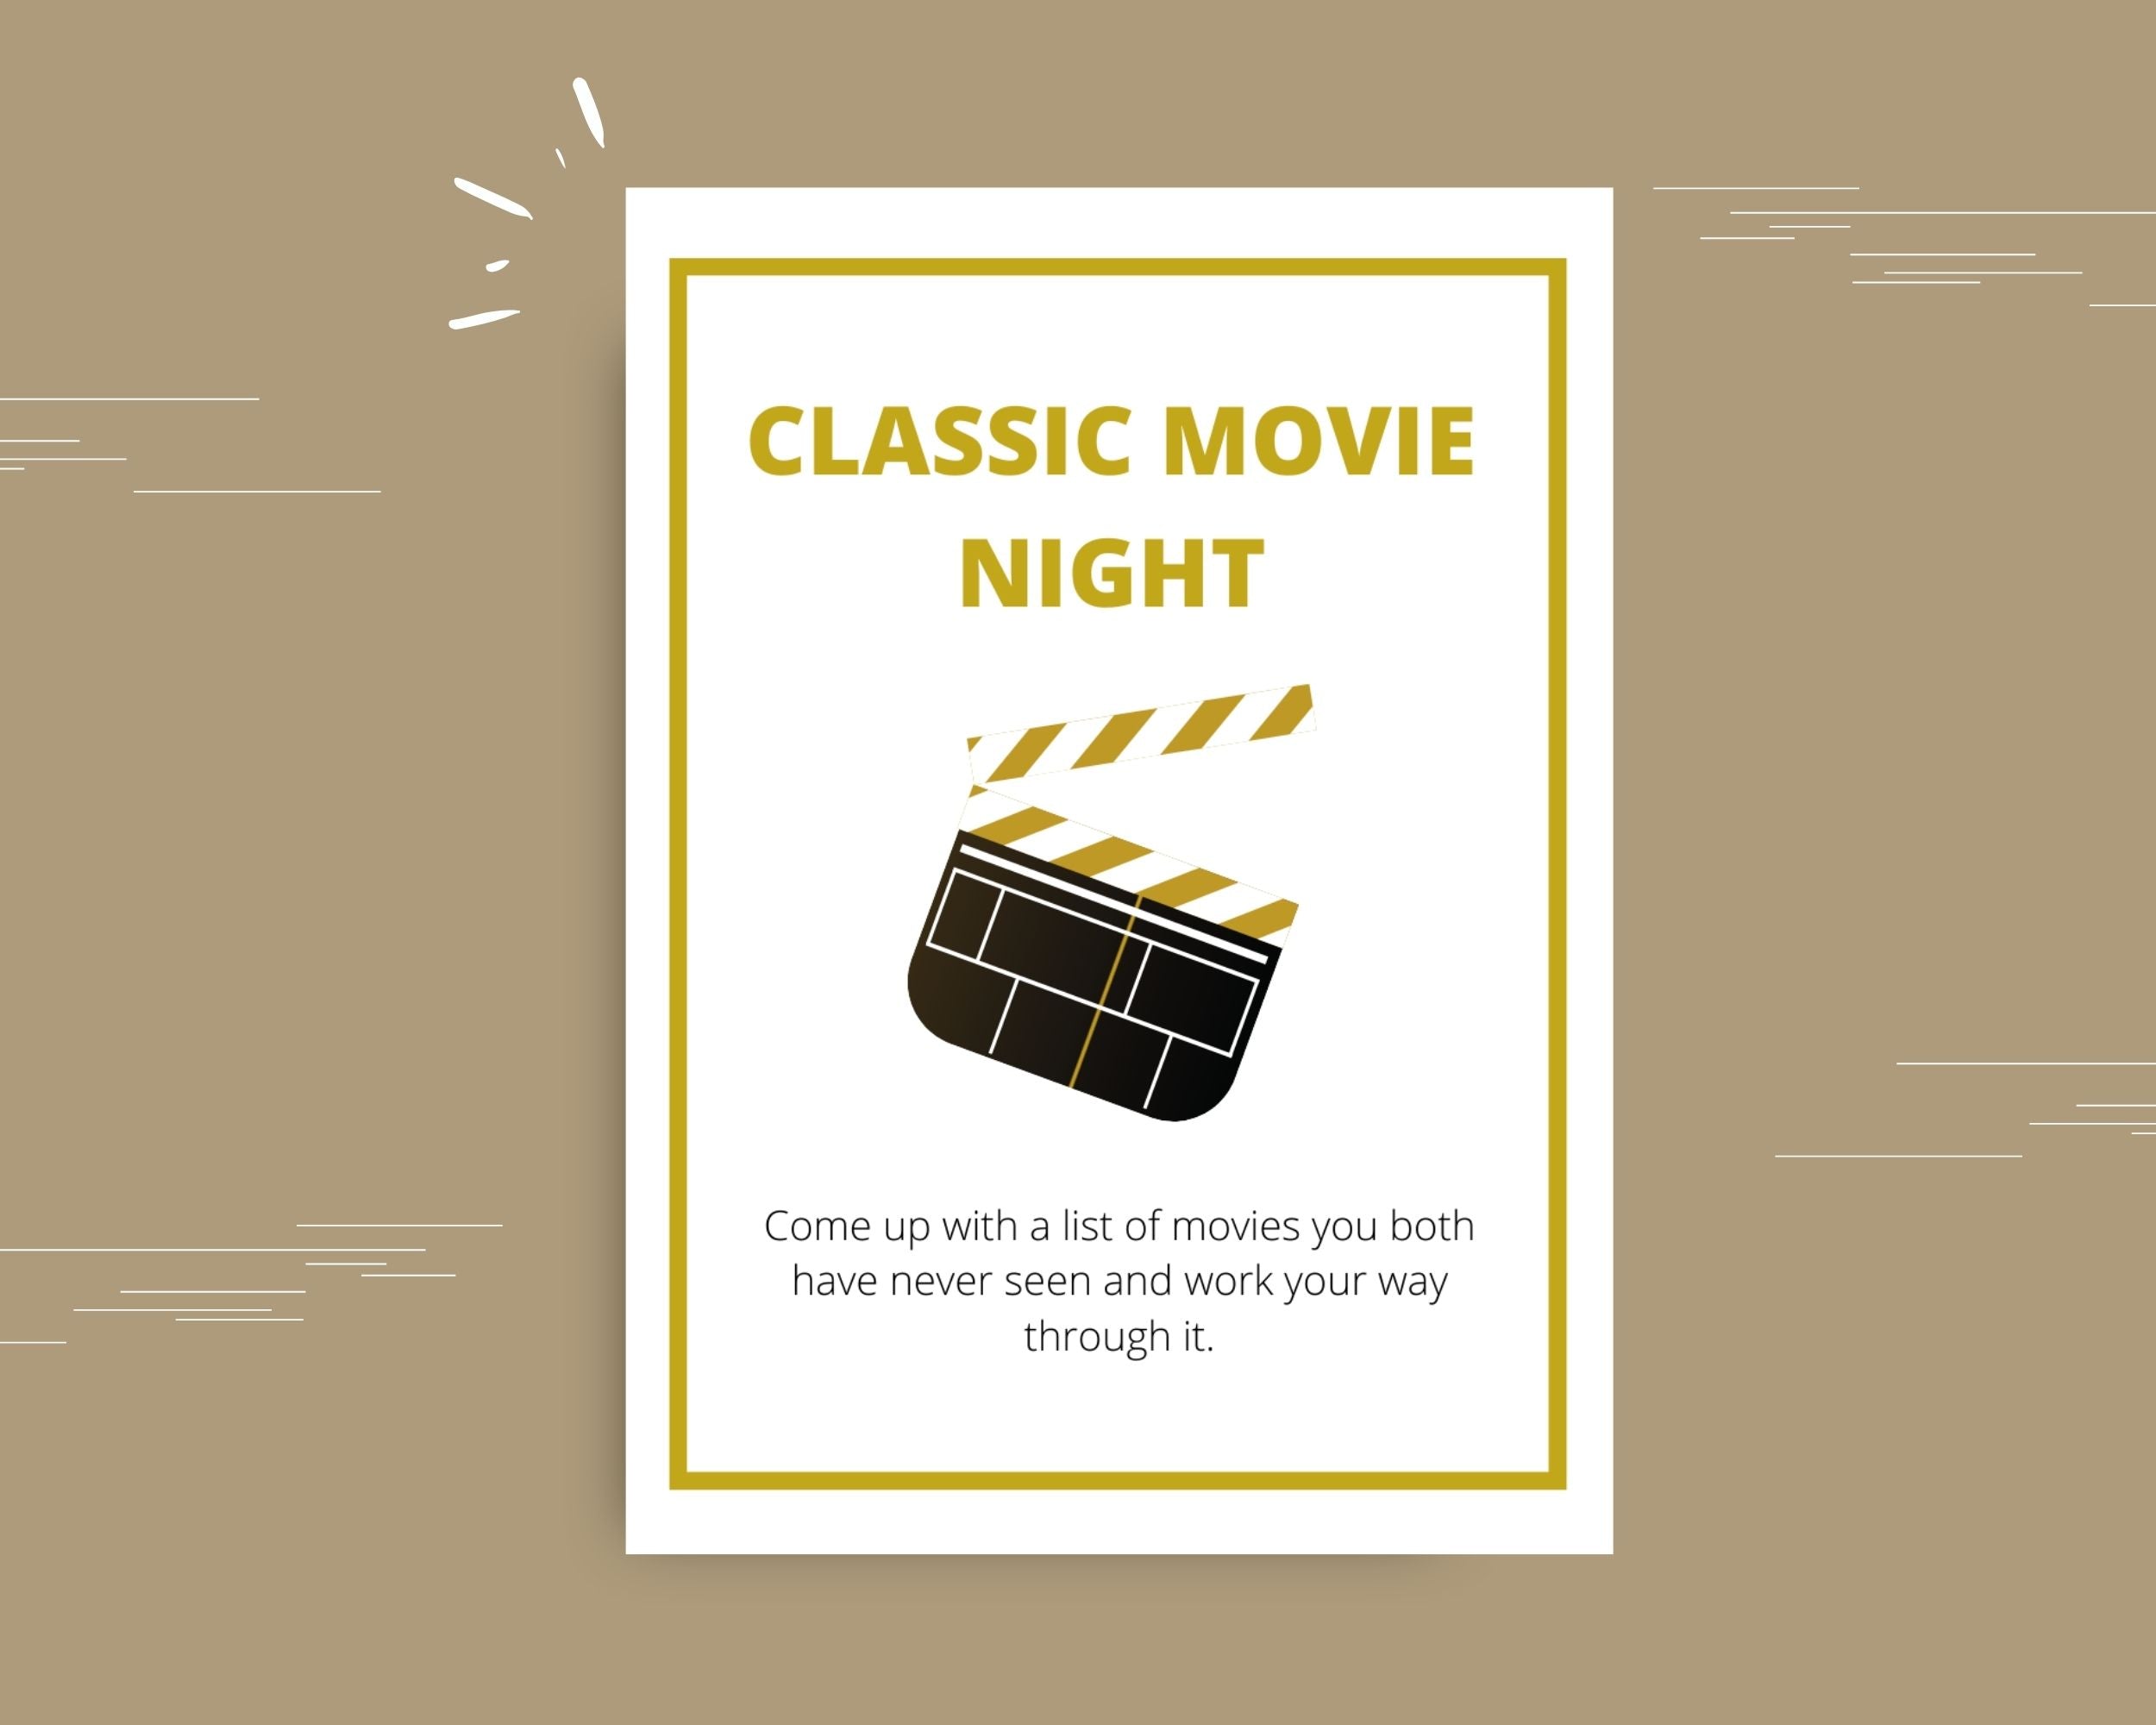 50 Date Night Ideas Cards | Canva Inspirational Cards | Commercial Use